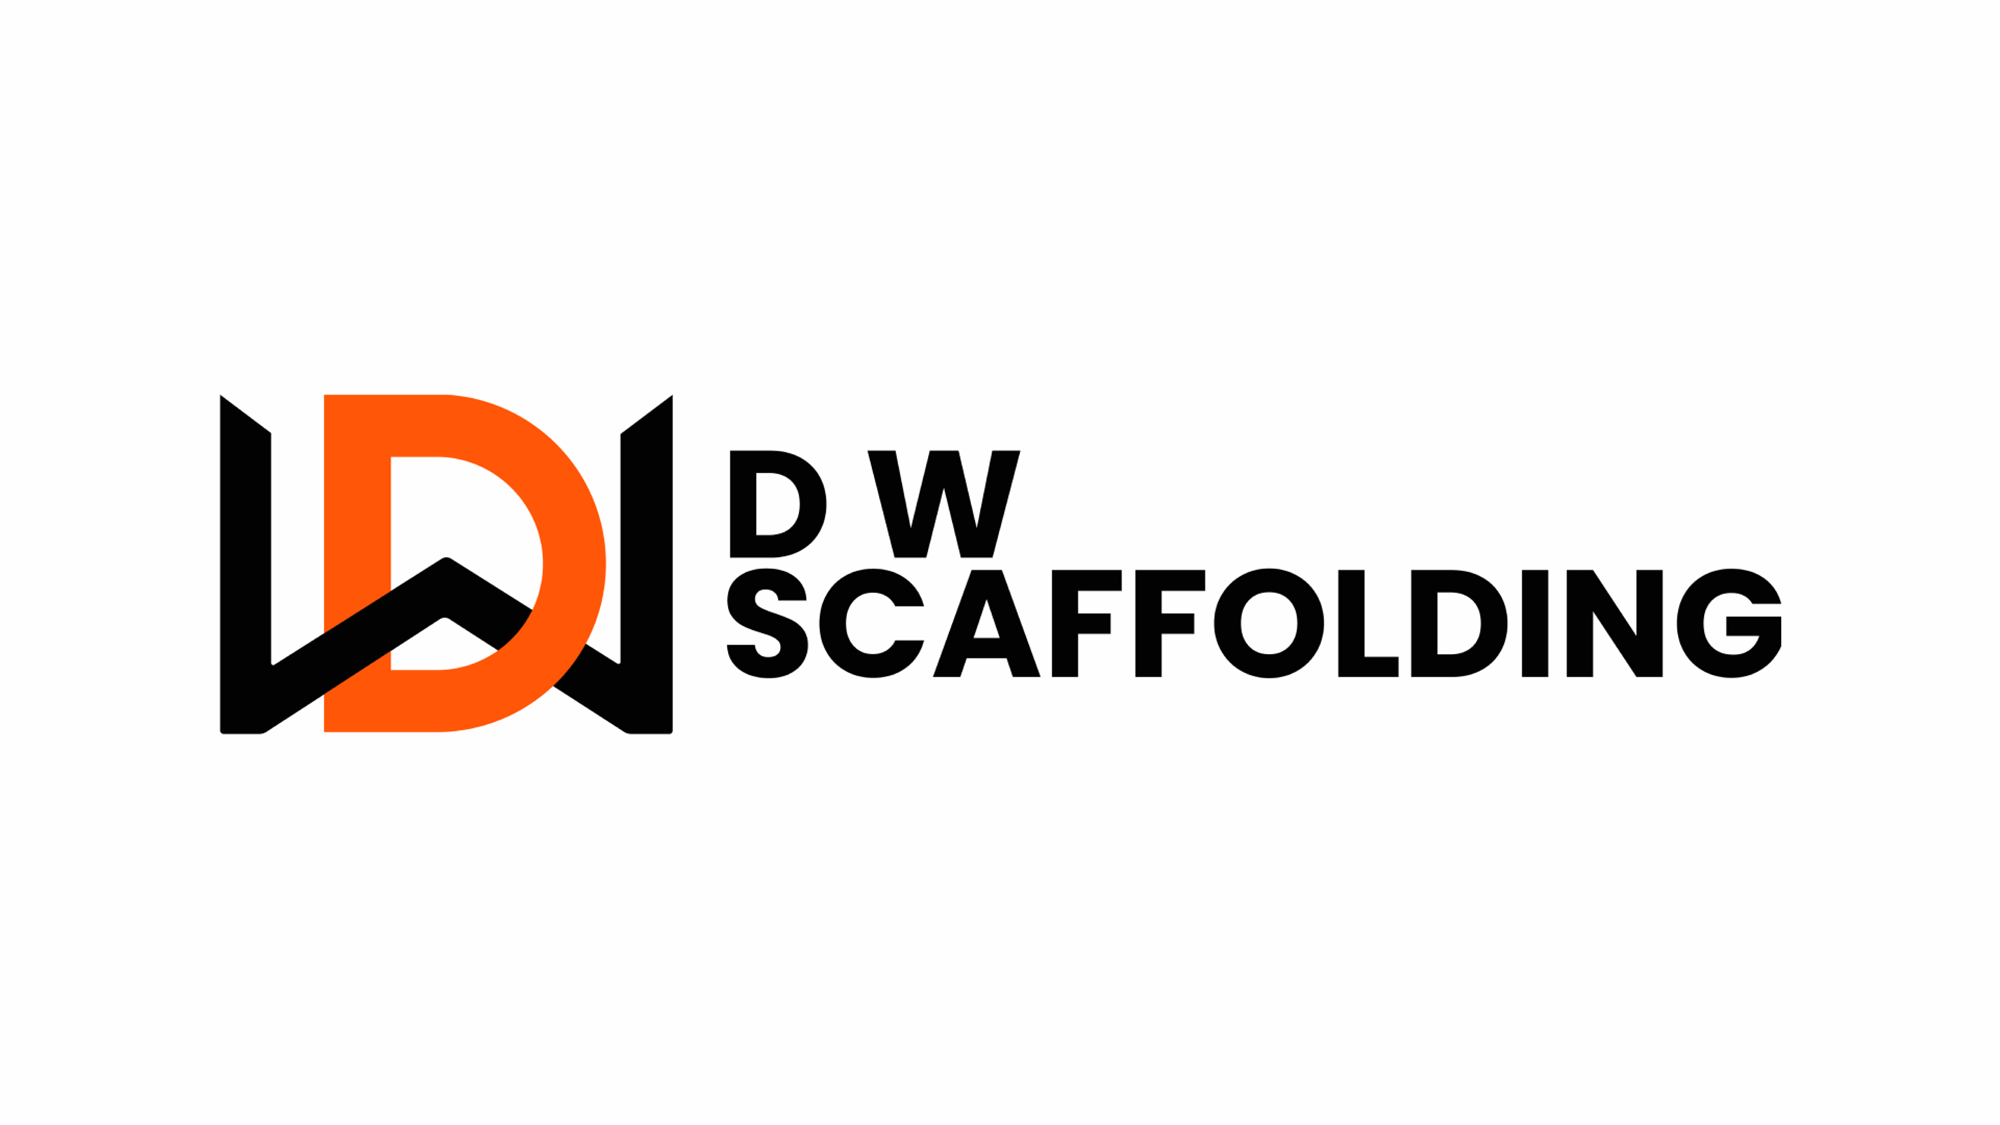 D W Scaffolding logo design #08 - white background with black text.